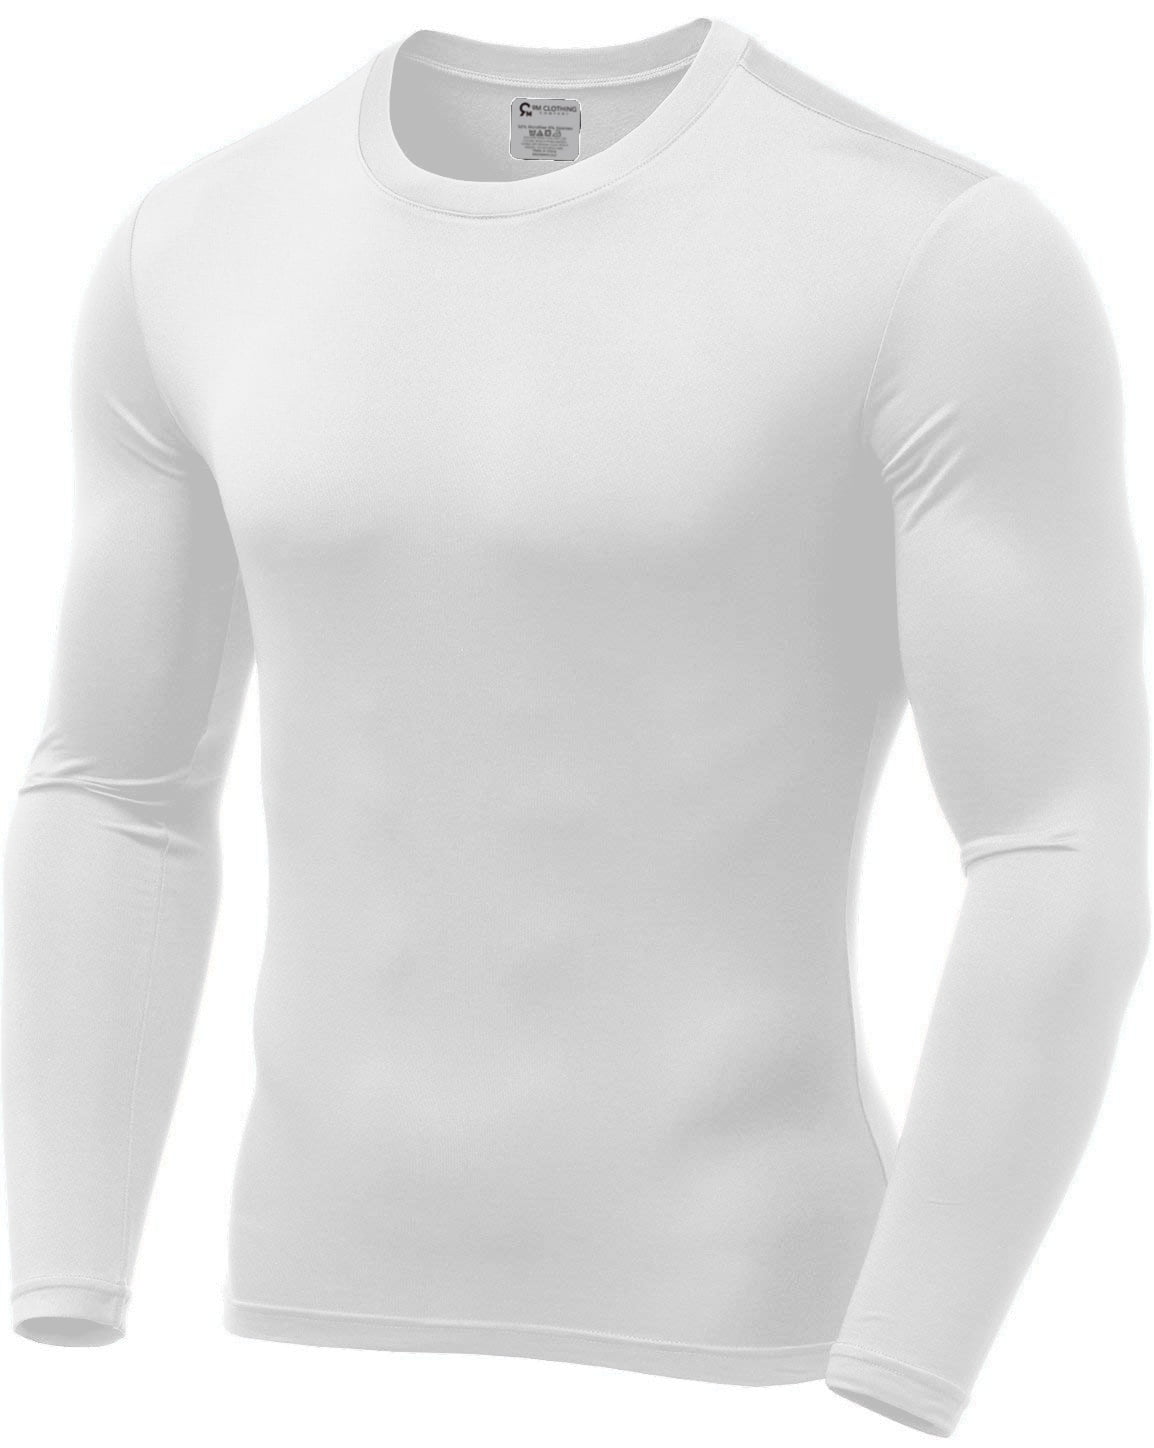 Compression Baselayer Crew Neck Top Fleece Lined Long Sleeve Underwear 9M Mens Ultra Soft Thermal Shirt 